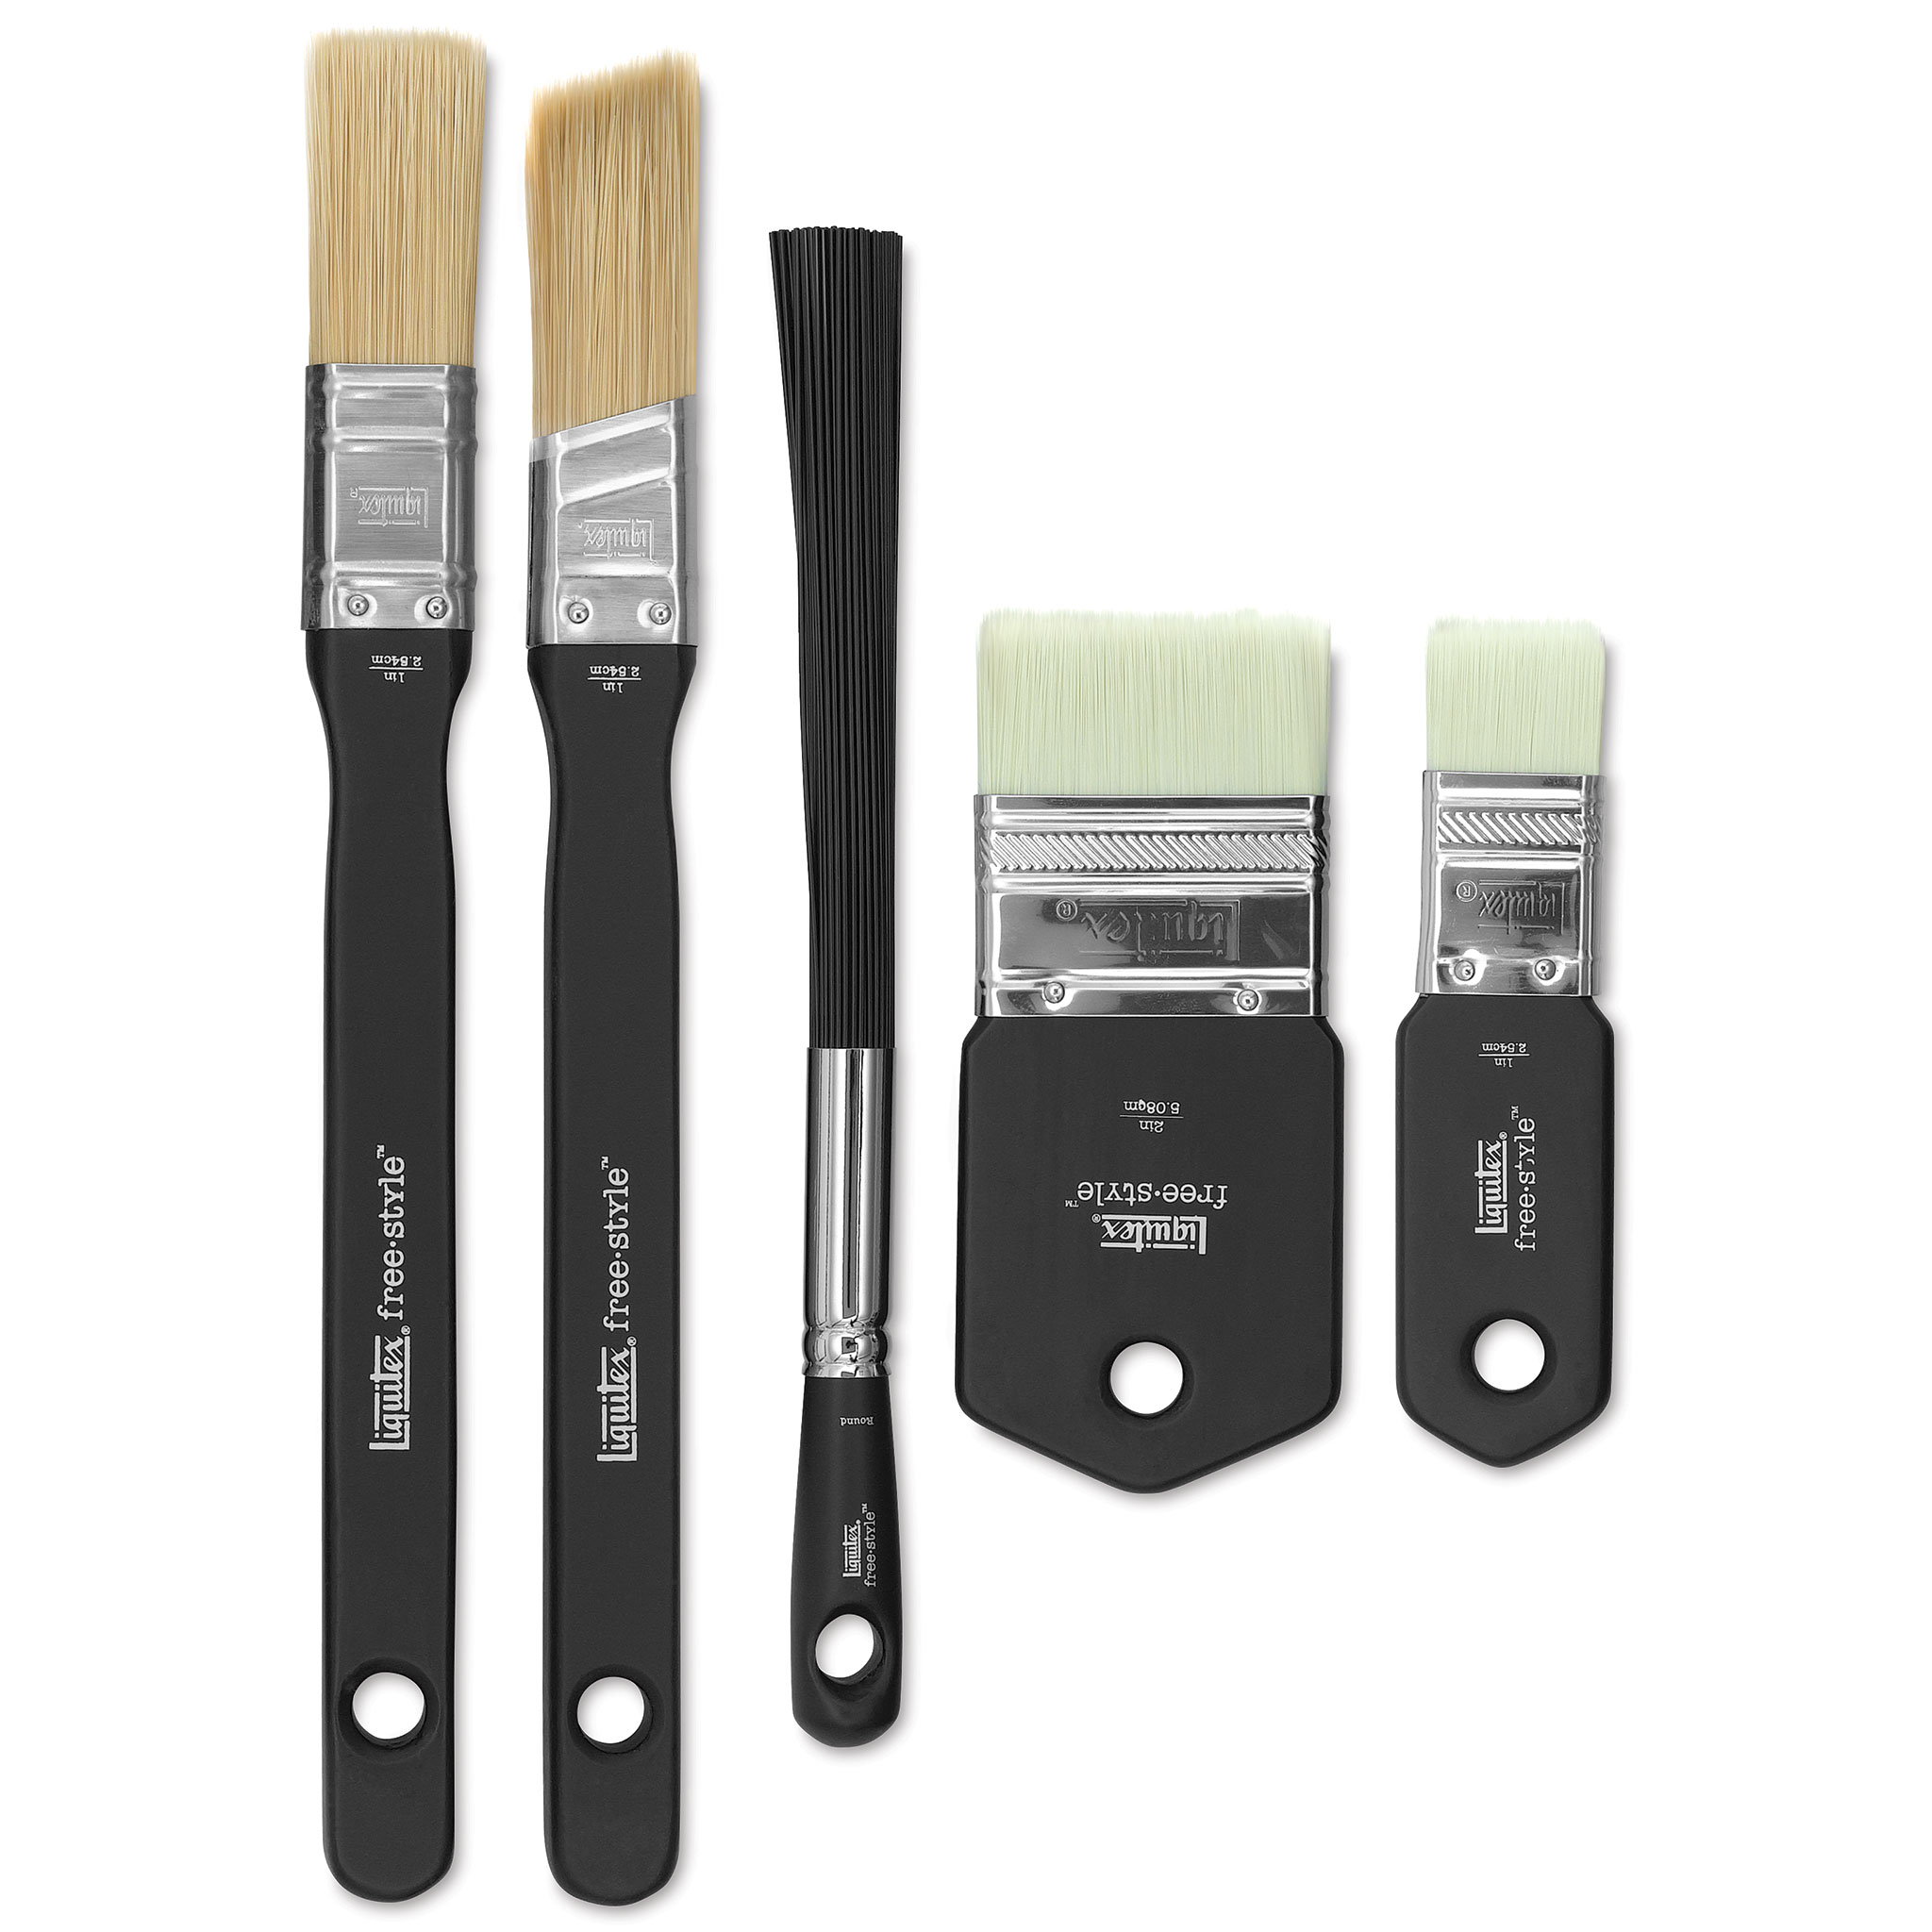 Staccato Short Handle Artist Brushes, Set of 8 w/ Easel Case - Assorted  Sizes